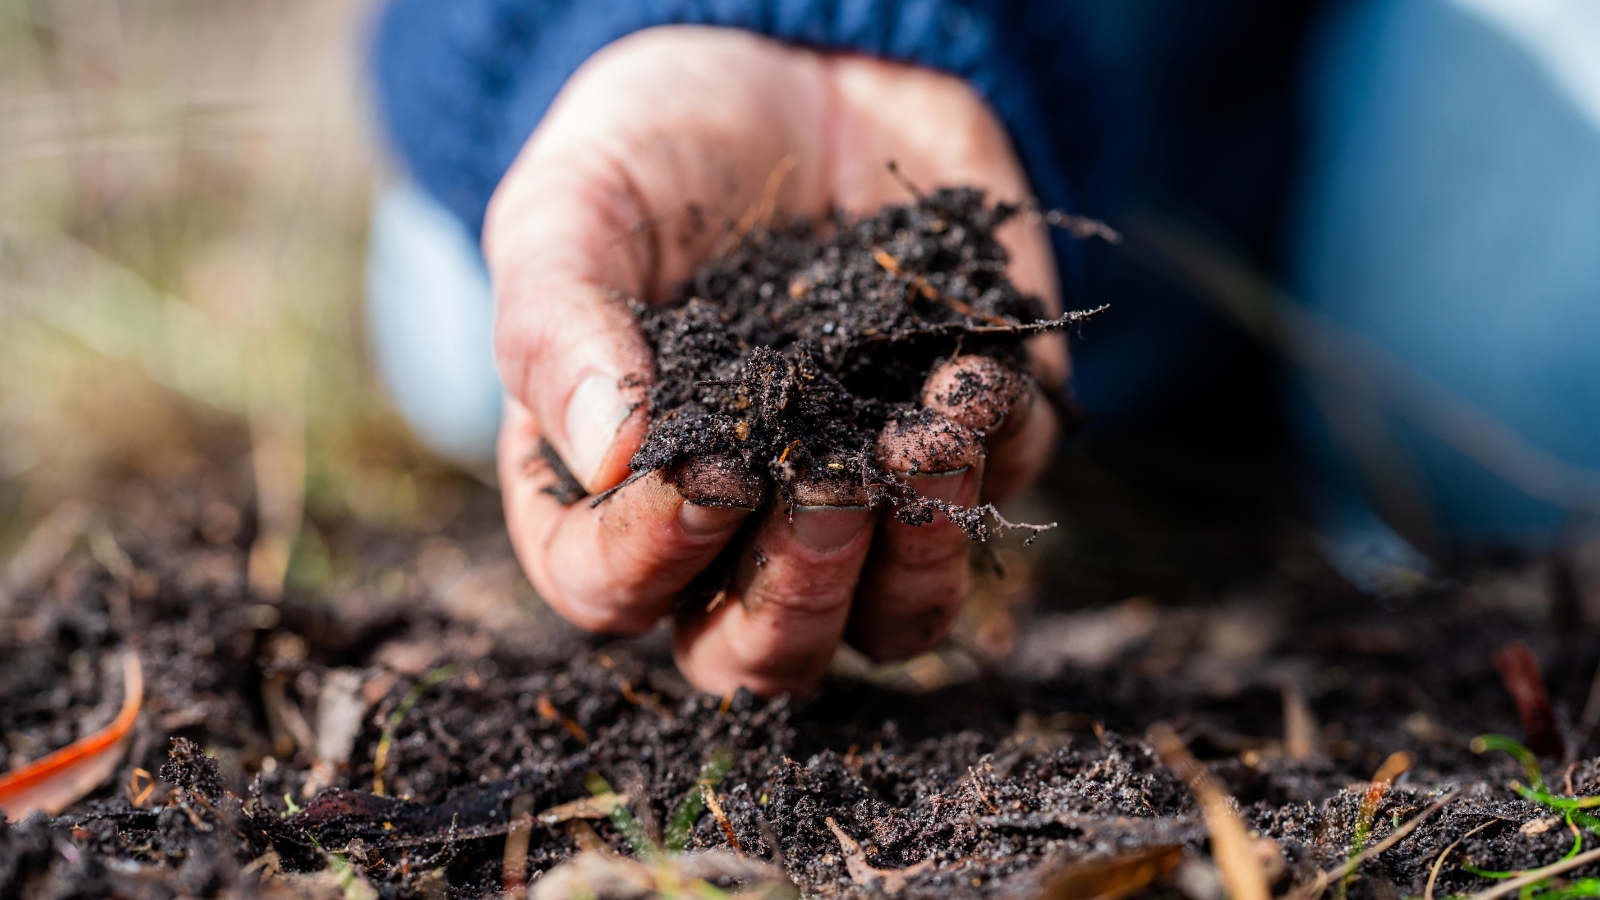  A hand cradles a rich compost teeming with microscopic life, fertile ground for growth and regeneration, showcasing the unseen ecosystem within soil, a bustling world vital for nourishing plant life.